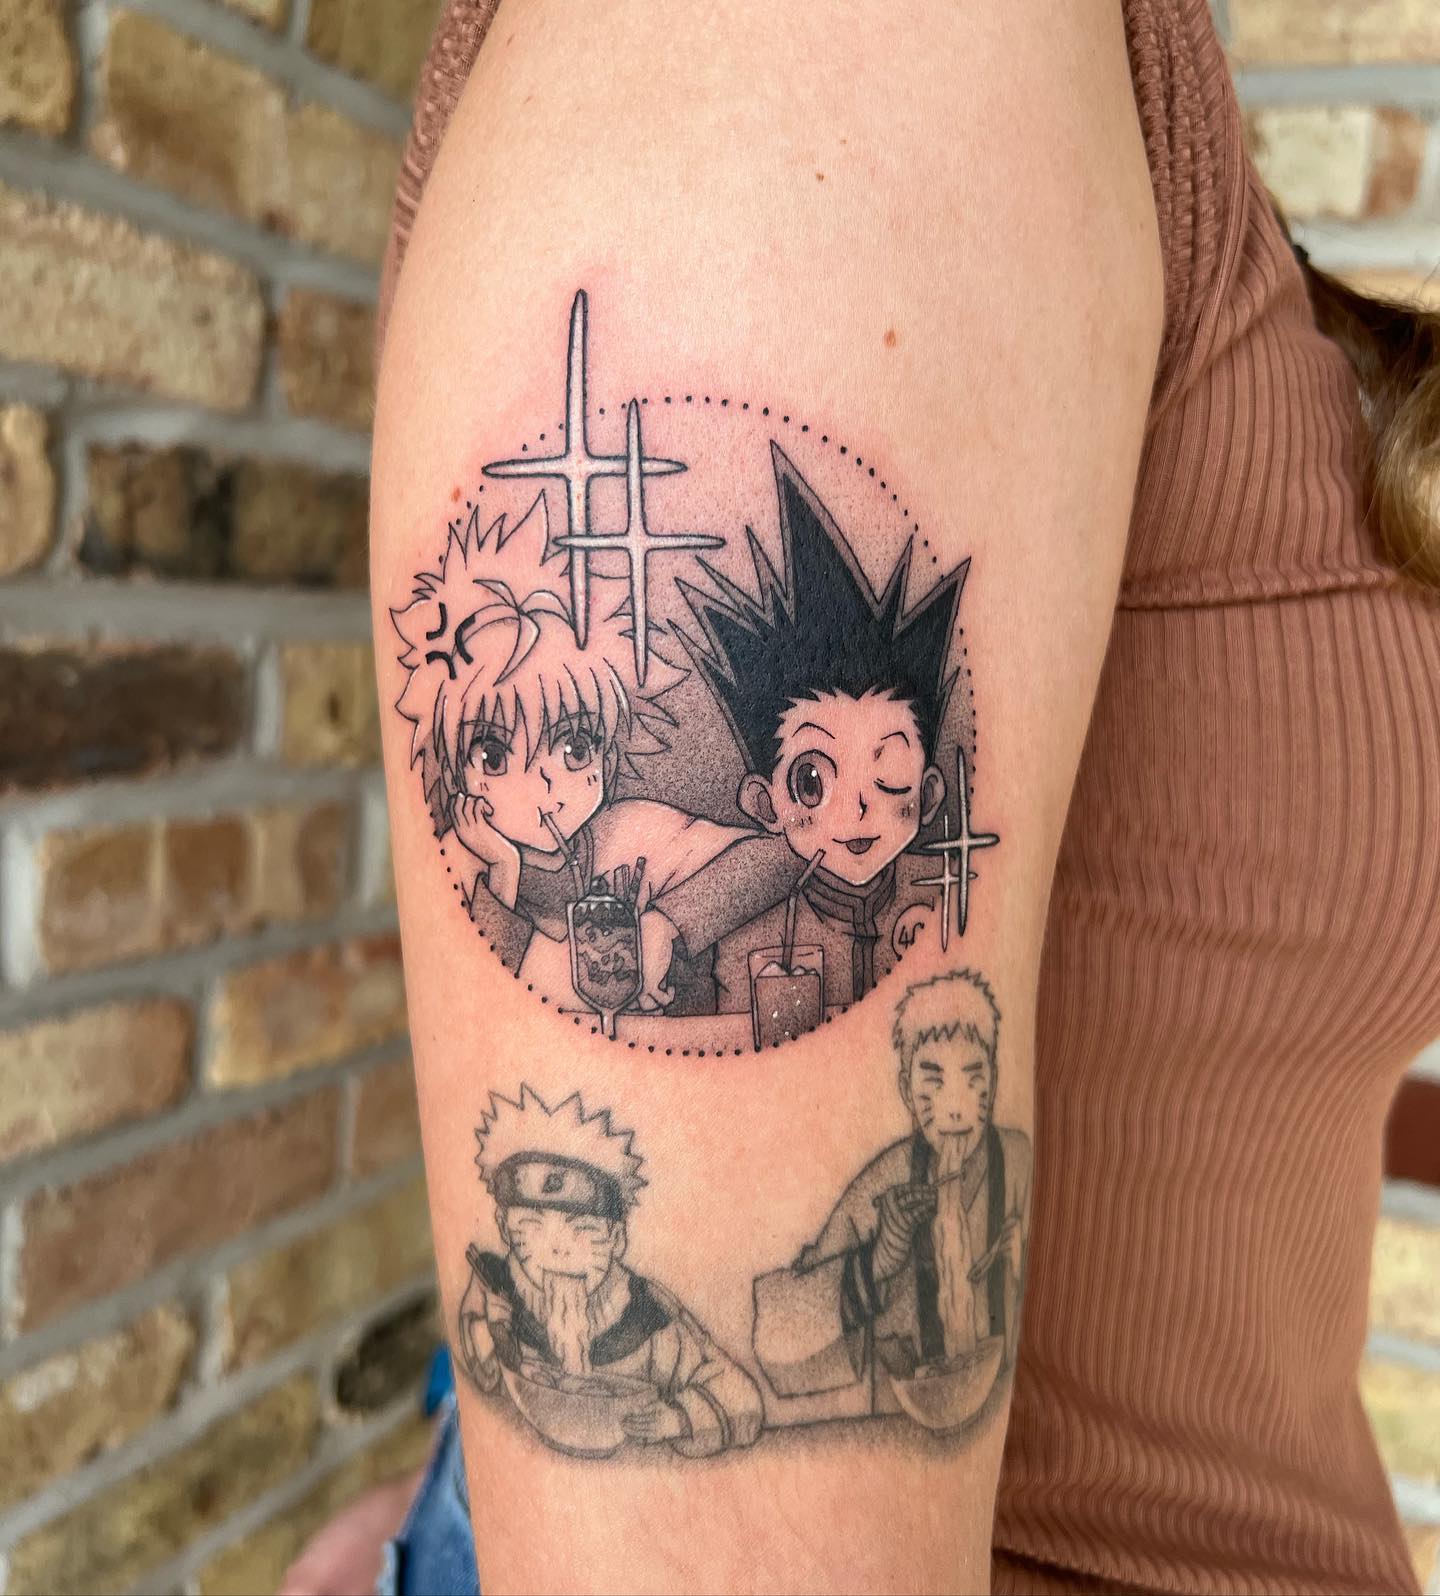 Brock Fidow Tattoos  Full shot of this one with Gon and Killua training in  some Zelda Breath of the Wild ruins complete with tiny treasure chest  Thanks again Jack  Facebook